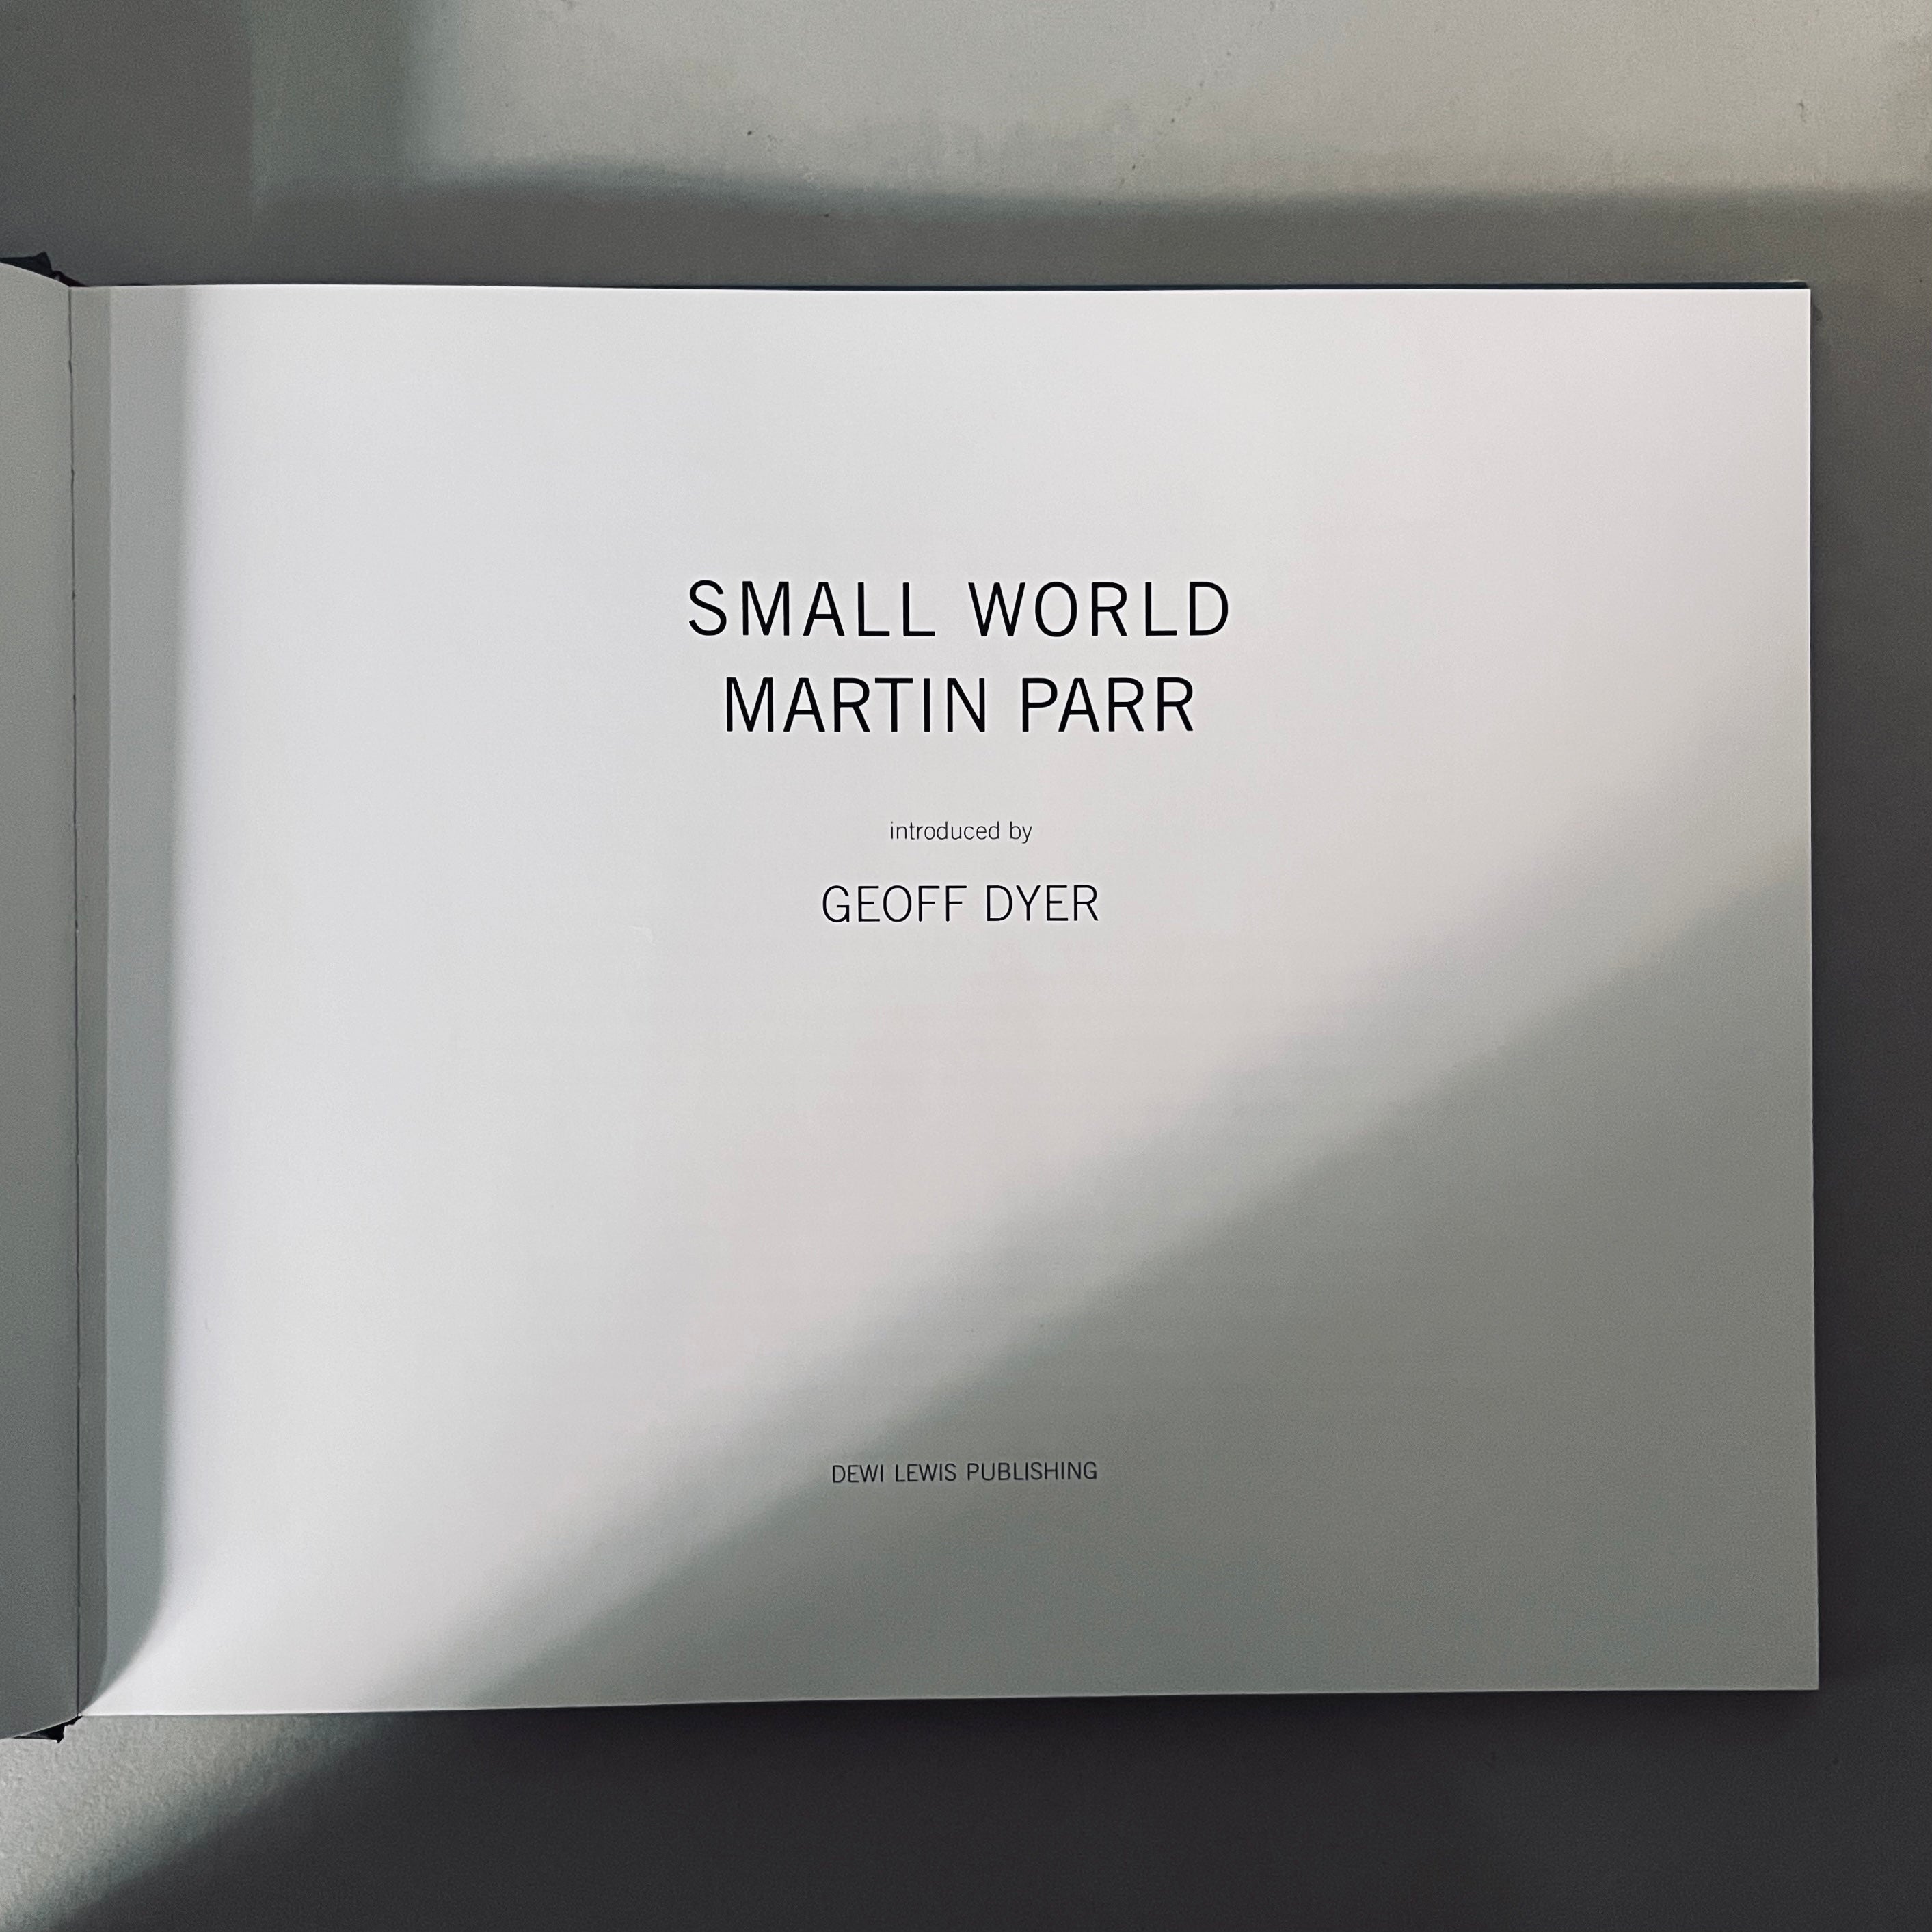 Small World by Martin Parr